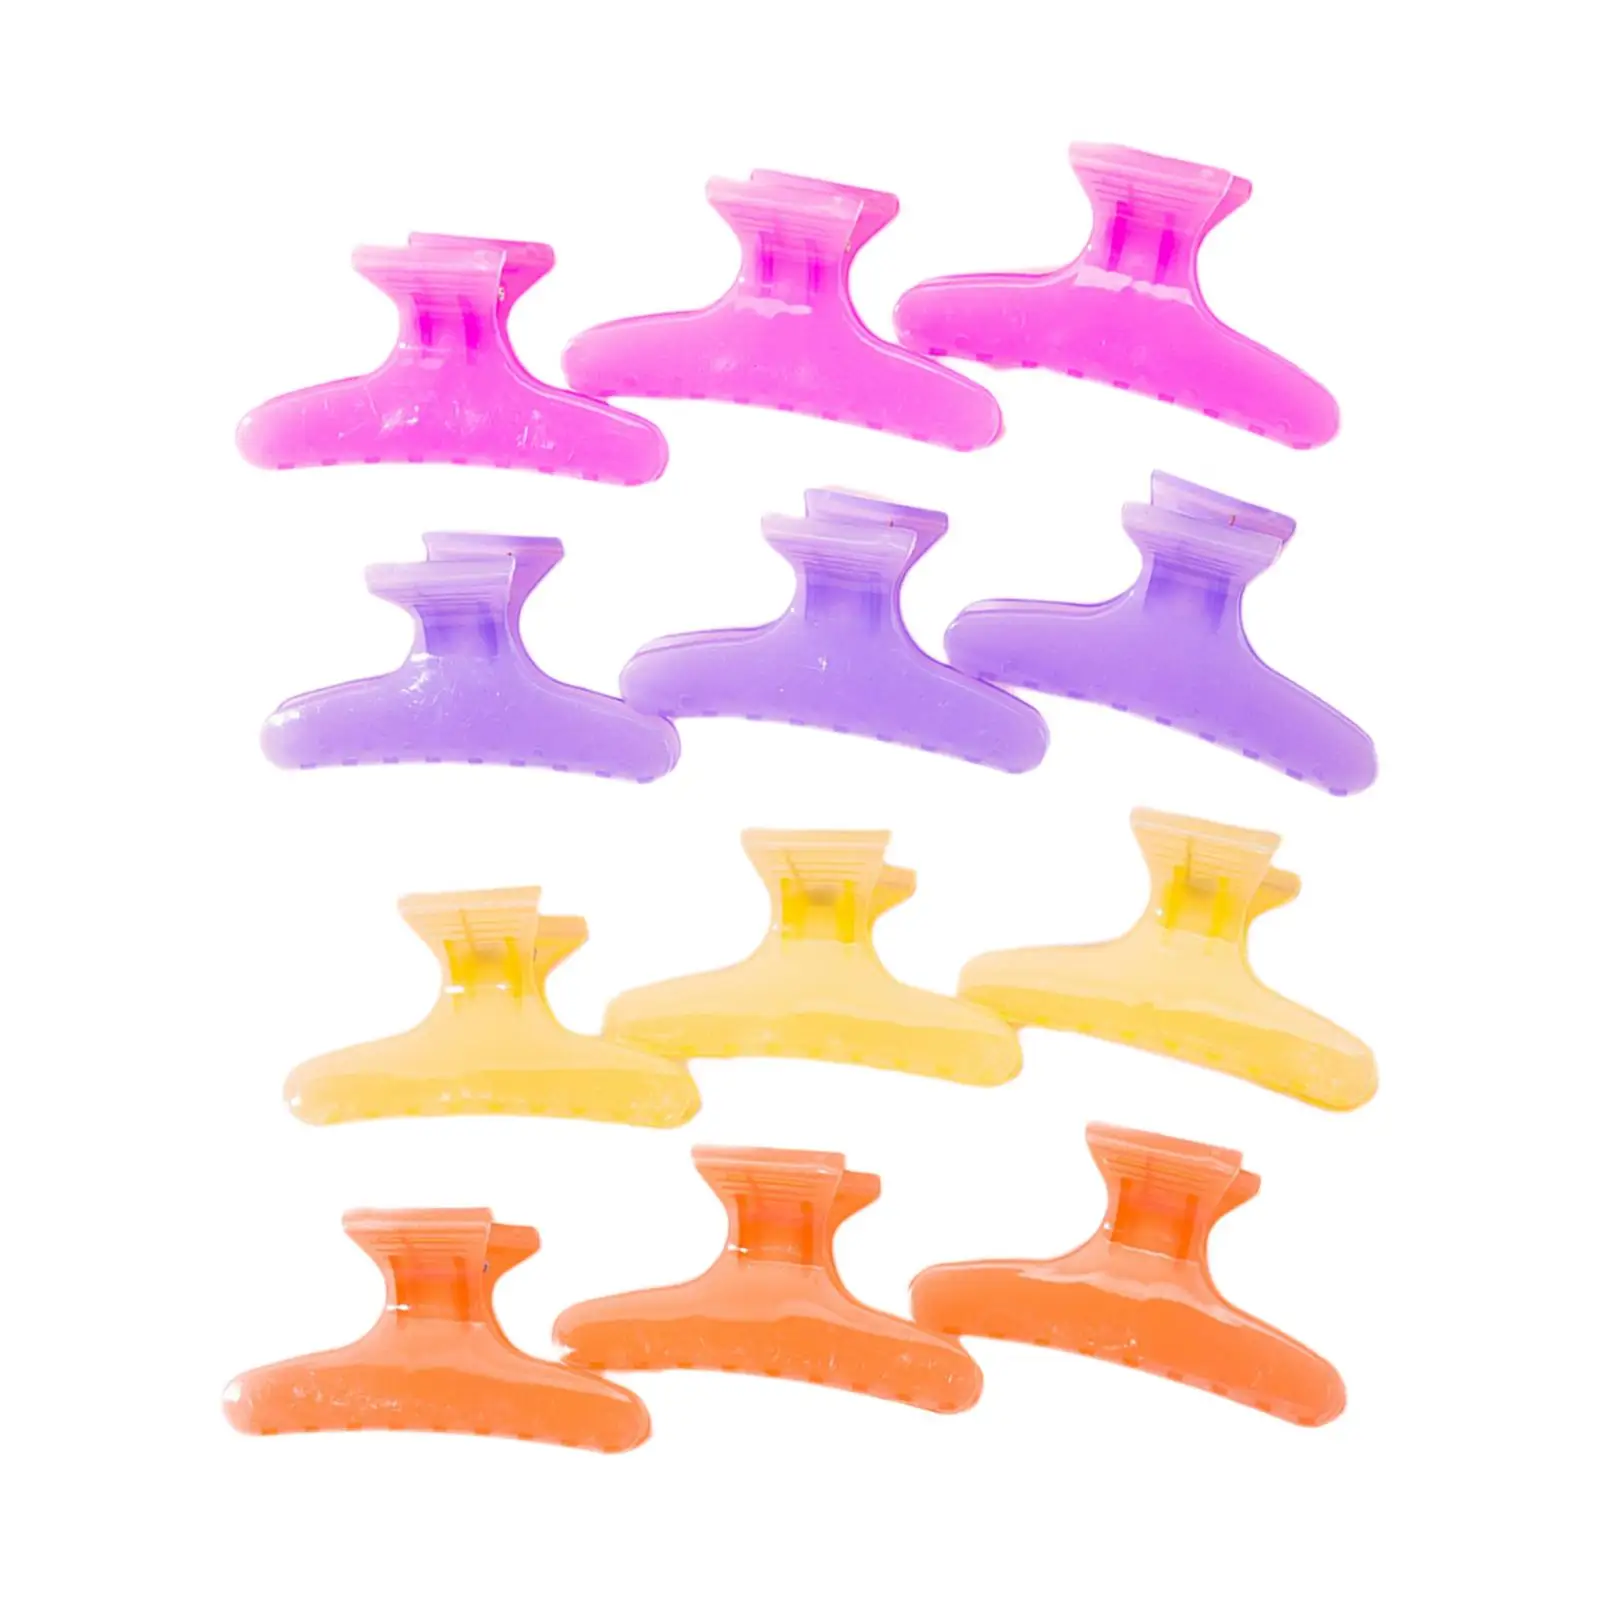 

12x Professional Sectioning Clamps Hairstyle Fixing Tools Barrettes Hair clips claw for Makeup Coloring Stylists Hairdressers